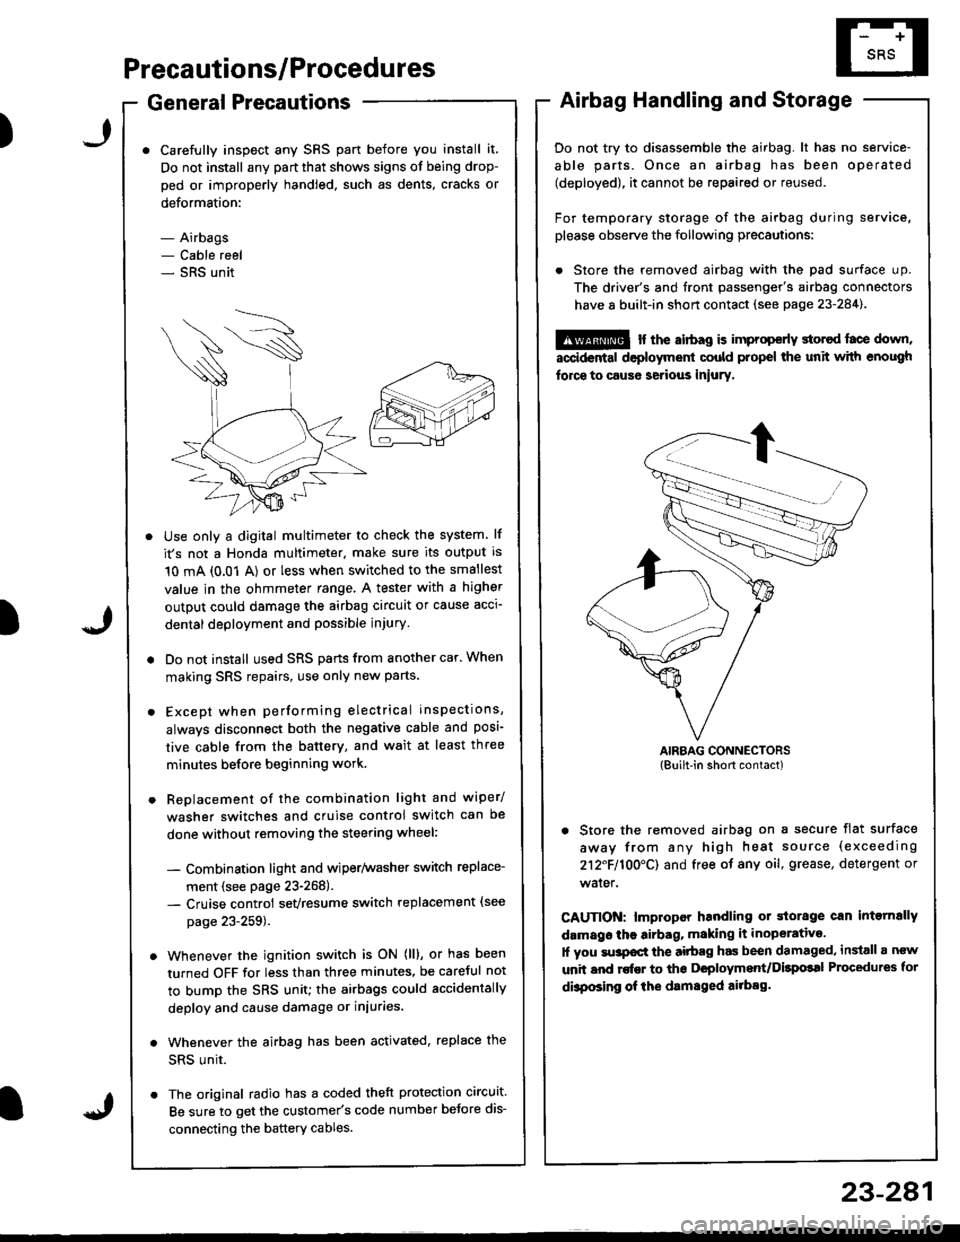 HONDA INTEGRA 1998 4.G User Guide )
Precautions/Procedures
General Precautions
Carefully inspect any SRS part before you install it,
Do not install any part that shows signs of being drop-
ped or improperly handled. such as dents, cra